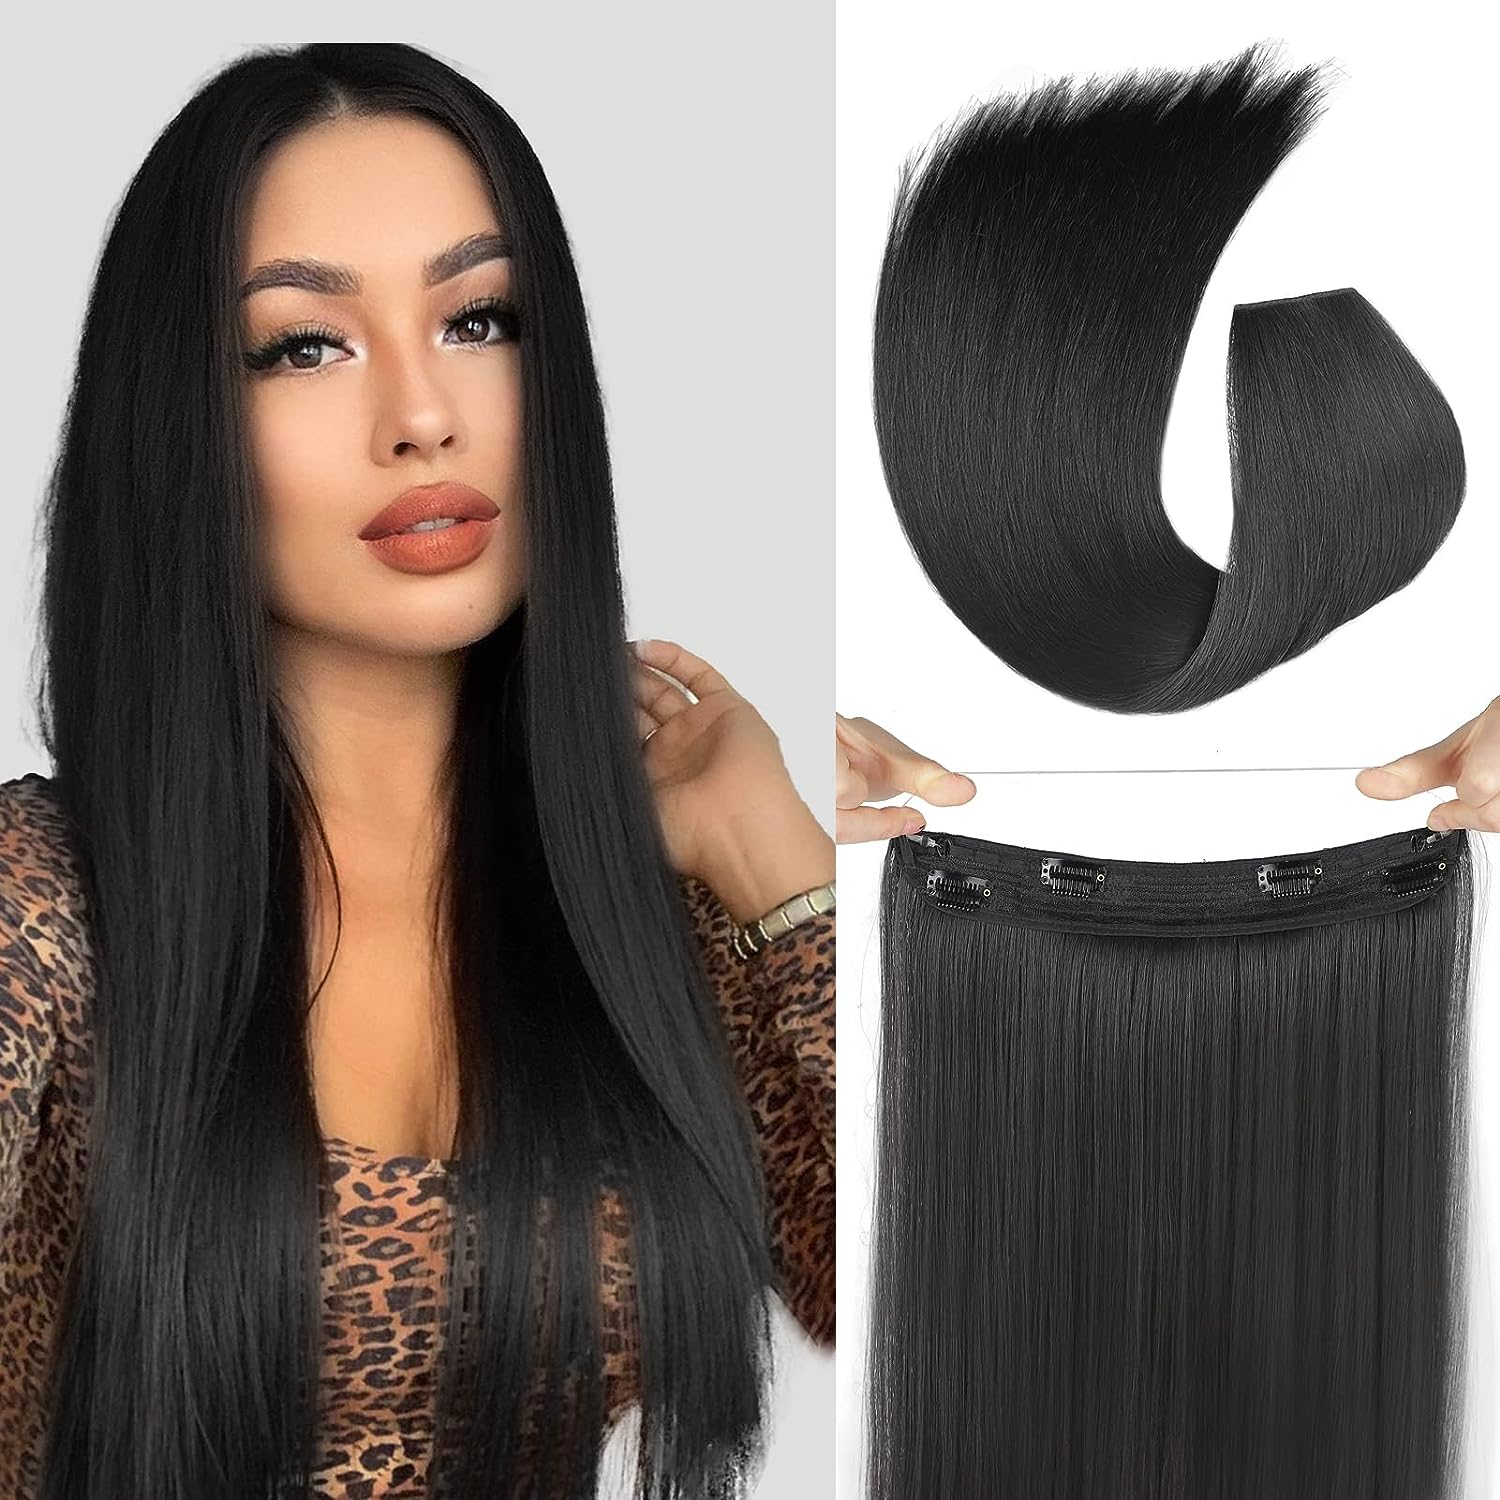 Isaic Black Hair Extensions for Women 24 Inch Straight [...]